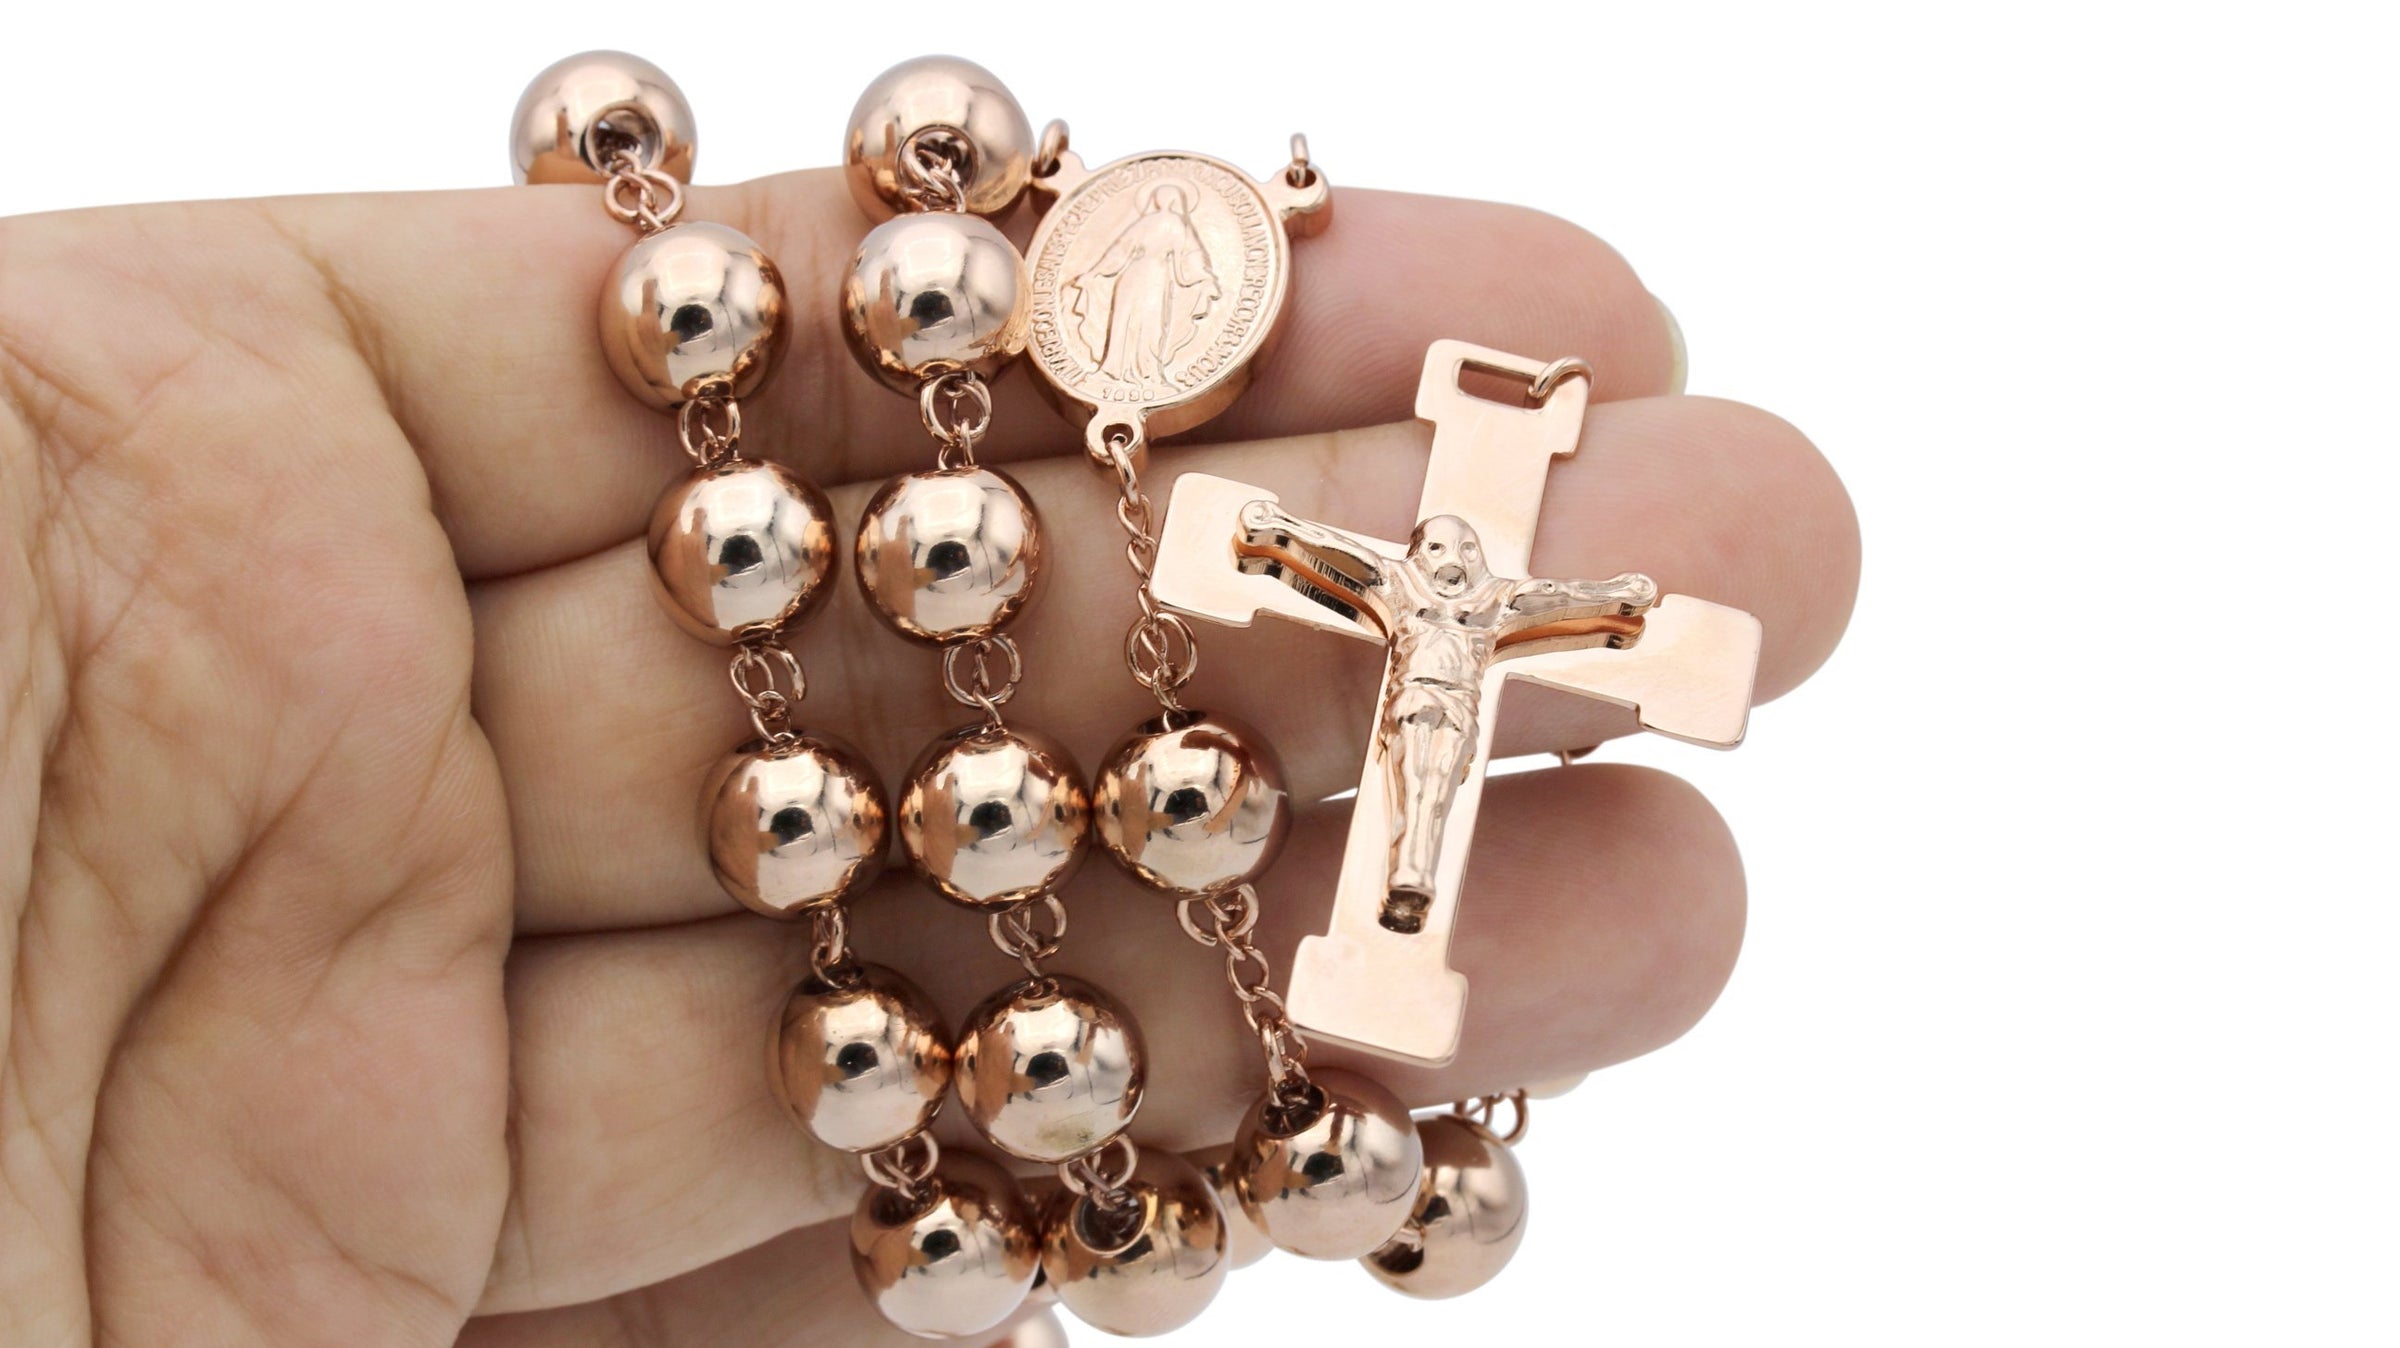 Traditional Rose Gold Rosary Necklace Five Decade Catholic Prayer Beads 10mm